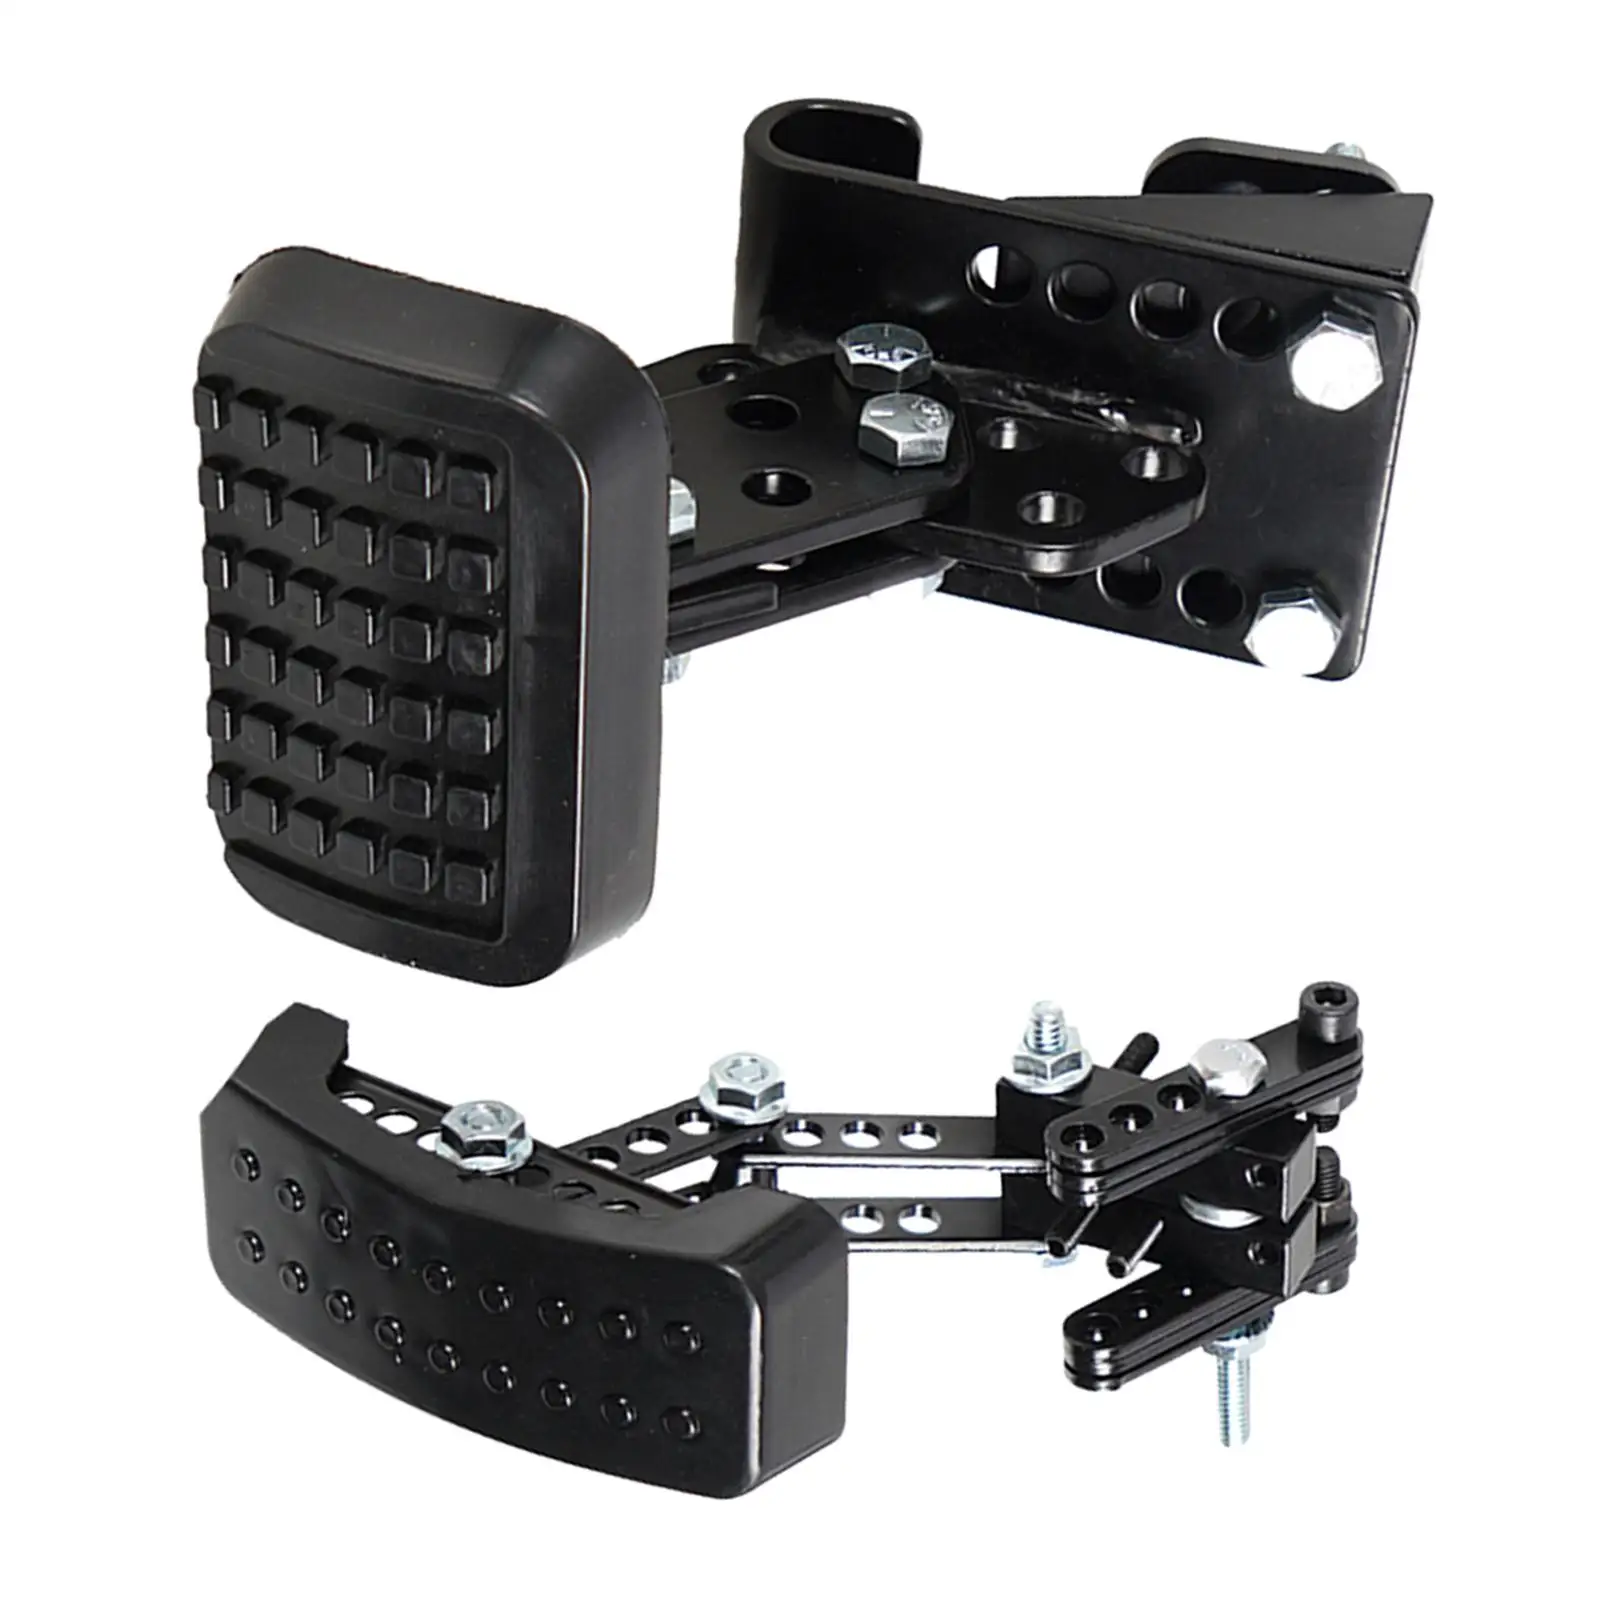 Universal Car Brake Pedal , Pedal Extension Enlarge Pedal Assembly car Anti Slip Pedal for Short Drivers ,Vehicle Accessories